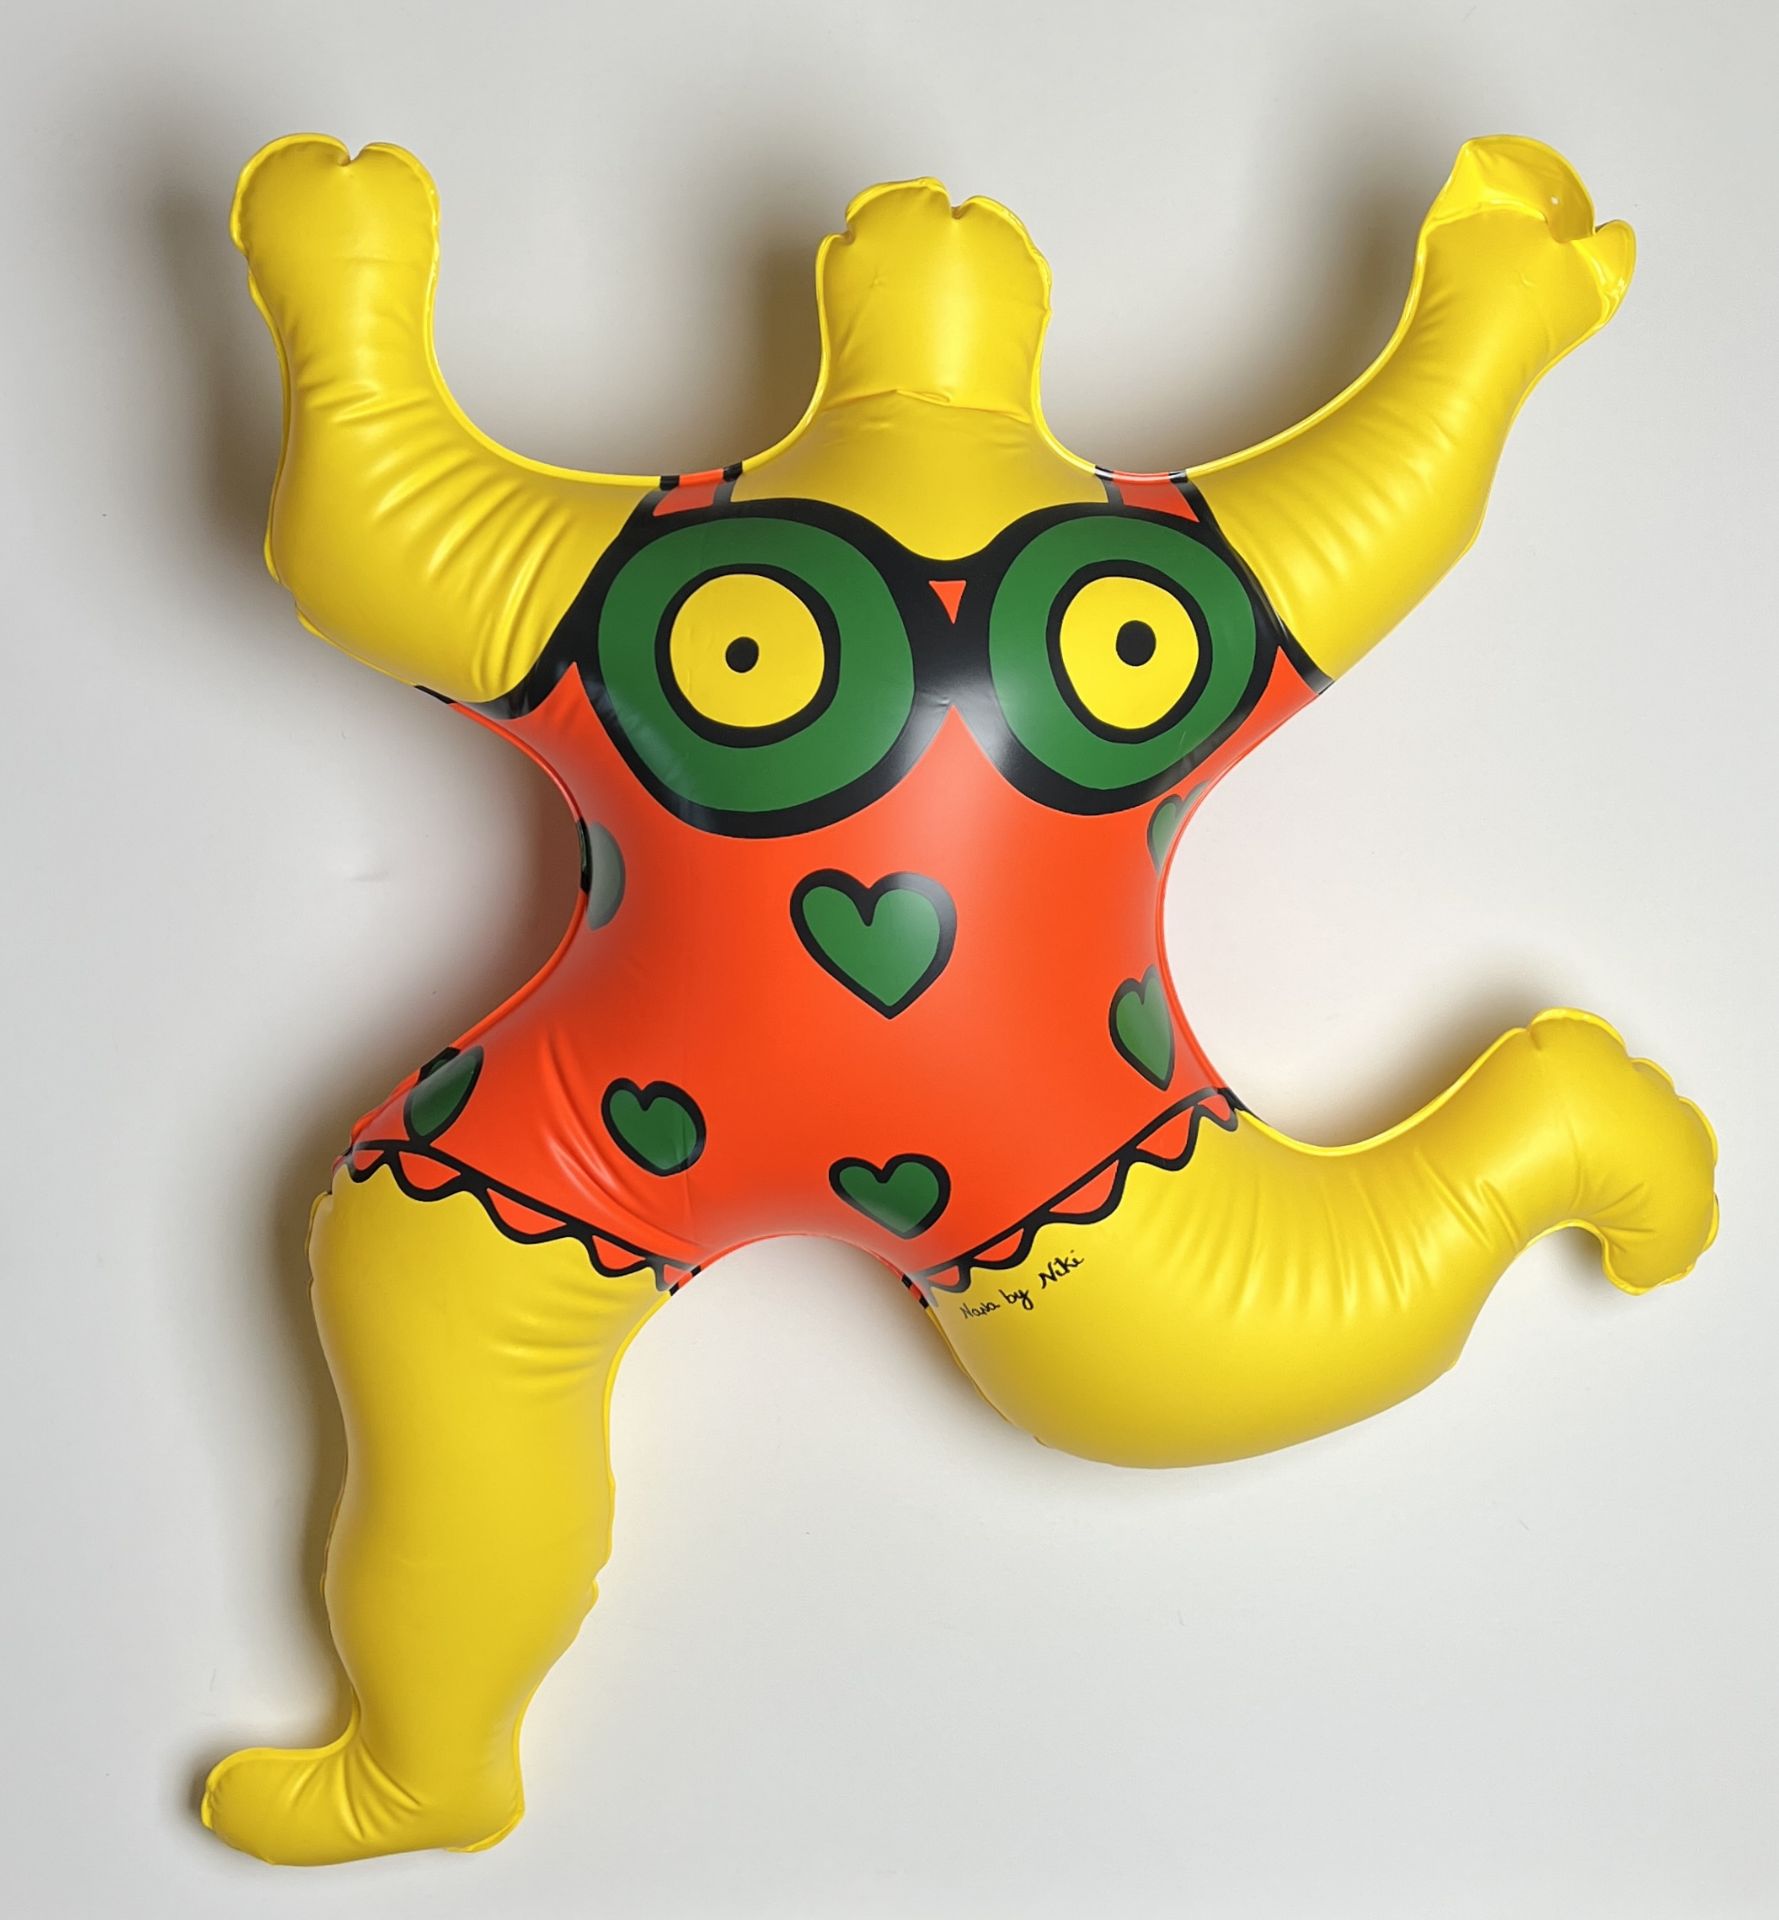 Niki De Saint Phalle. Yellow chick. Inflatable plastic sculpture. Signed "Nana by Niki" in the plate